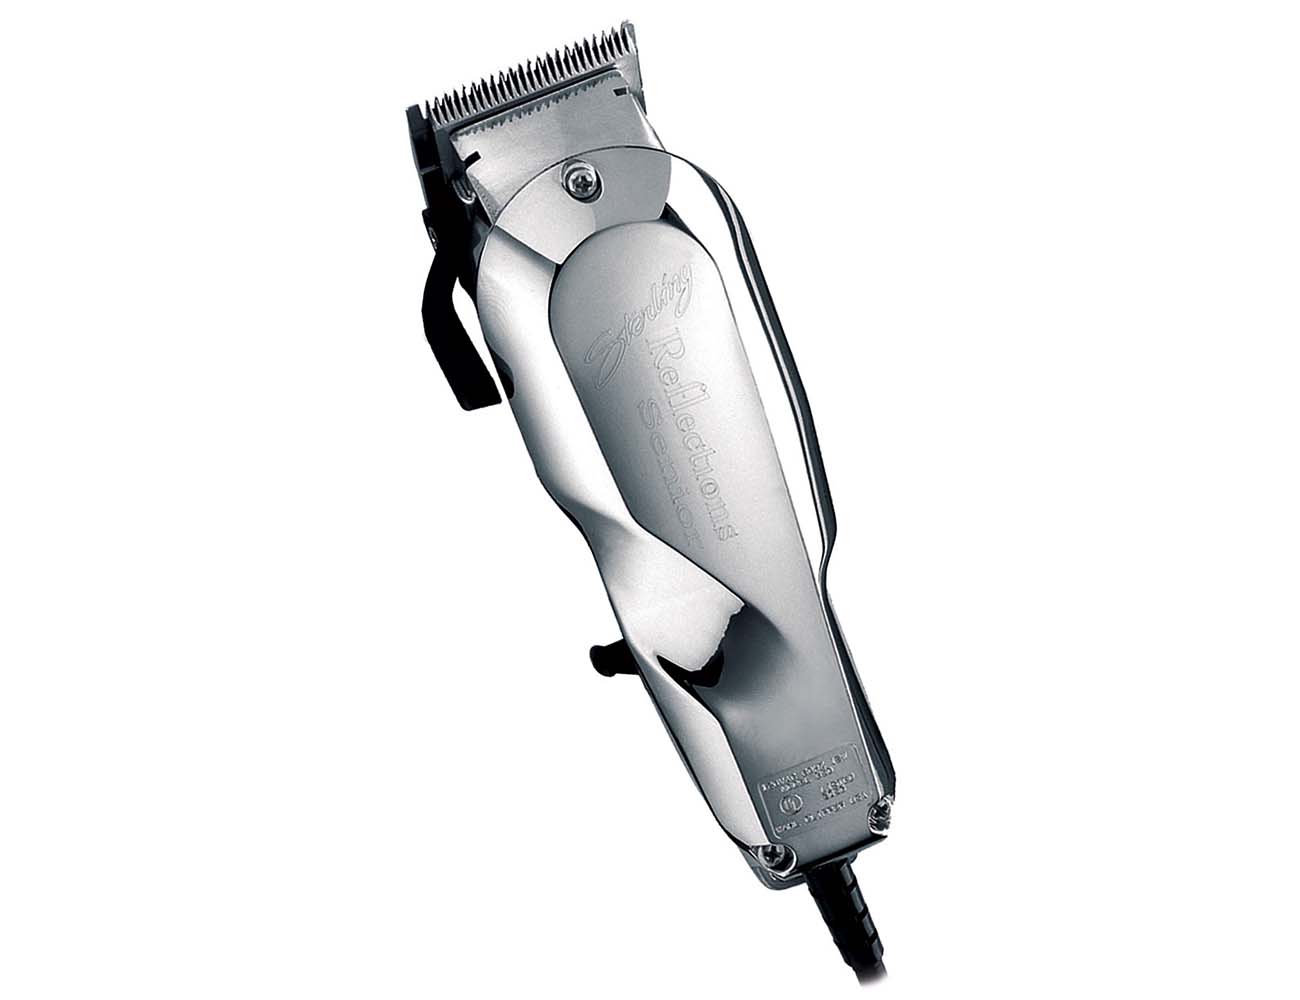 wahl senior clippers near me